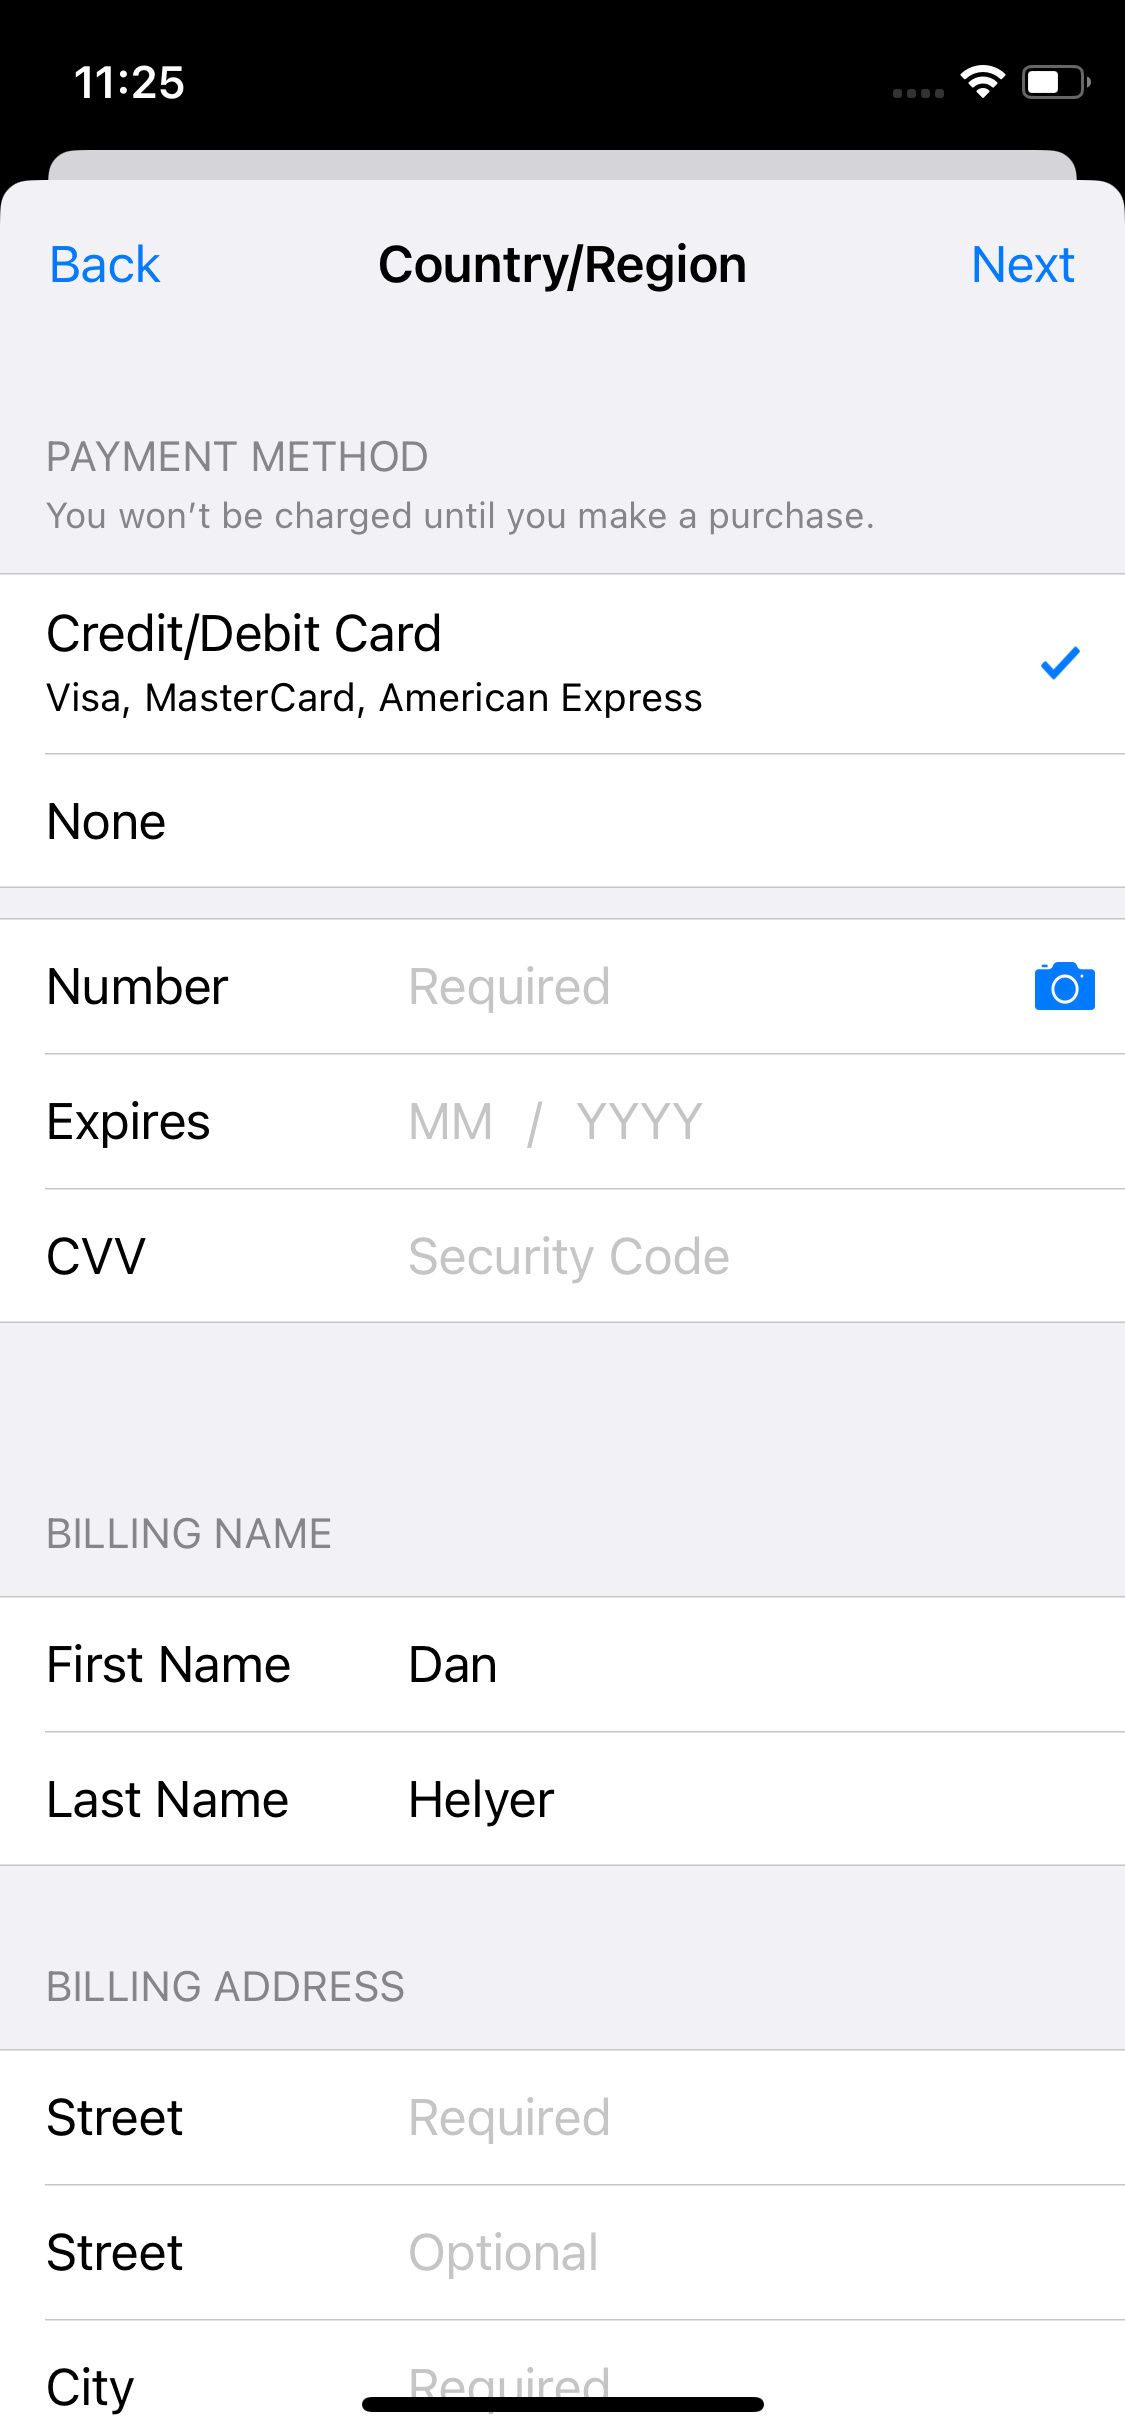 Country or Region payment details on iPhone